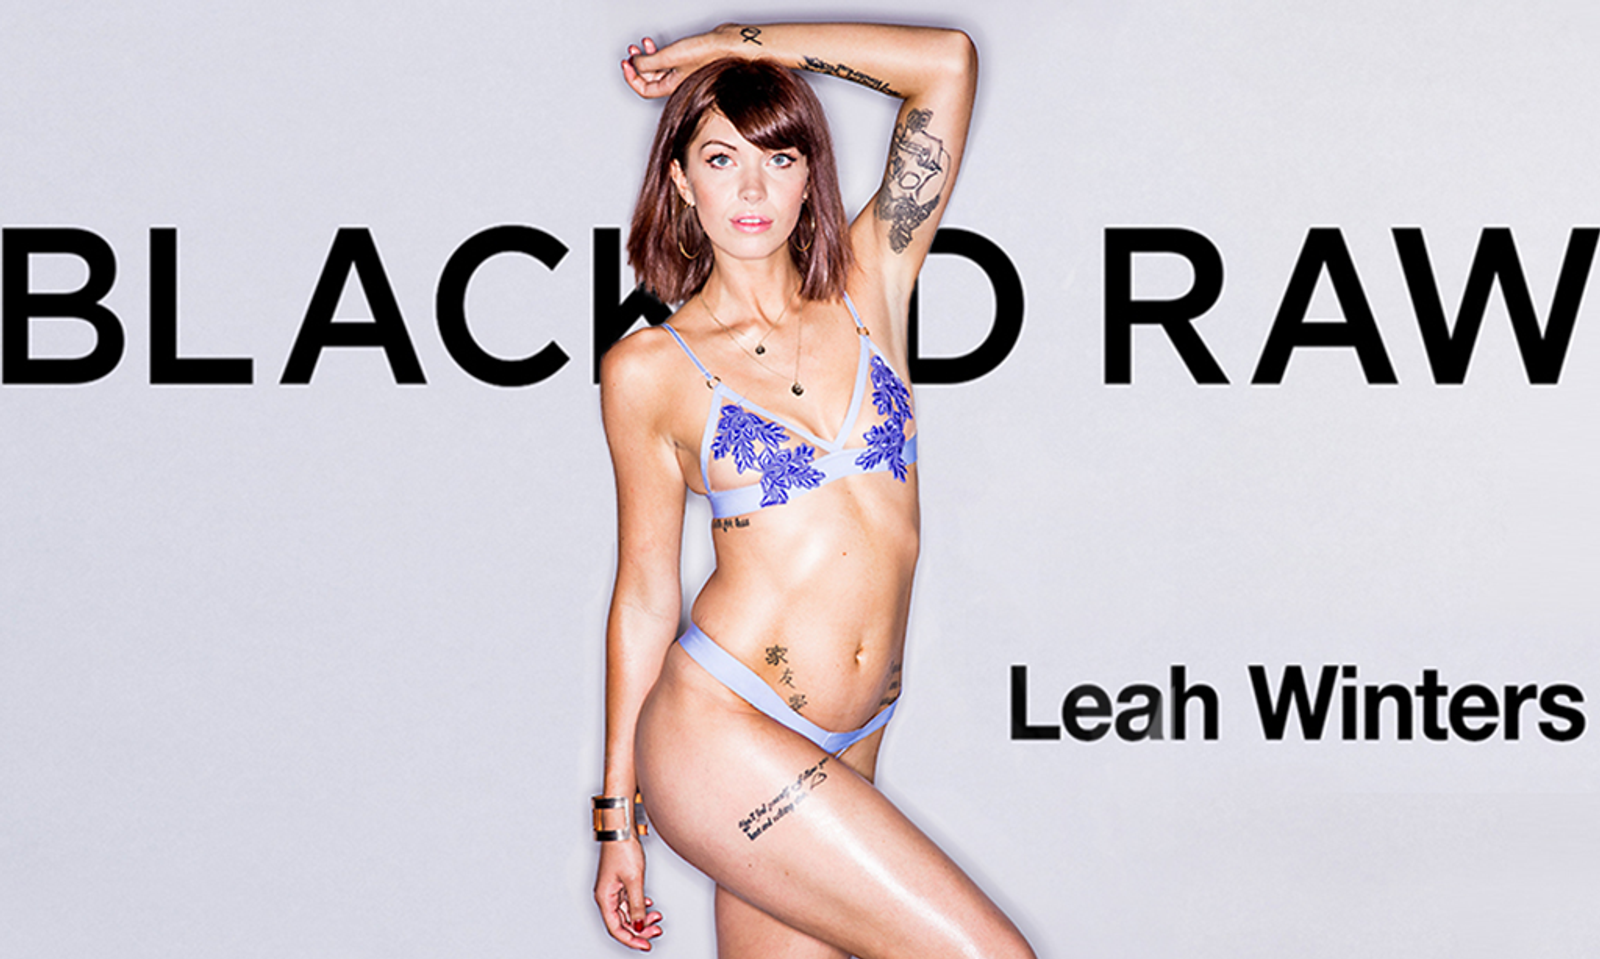 Leah Winters Makes Her Blacked Raw Debut, Announces Availability